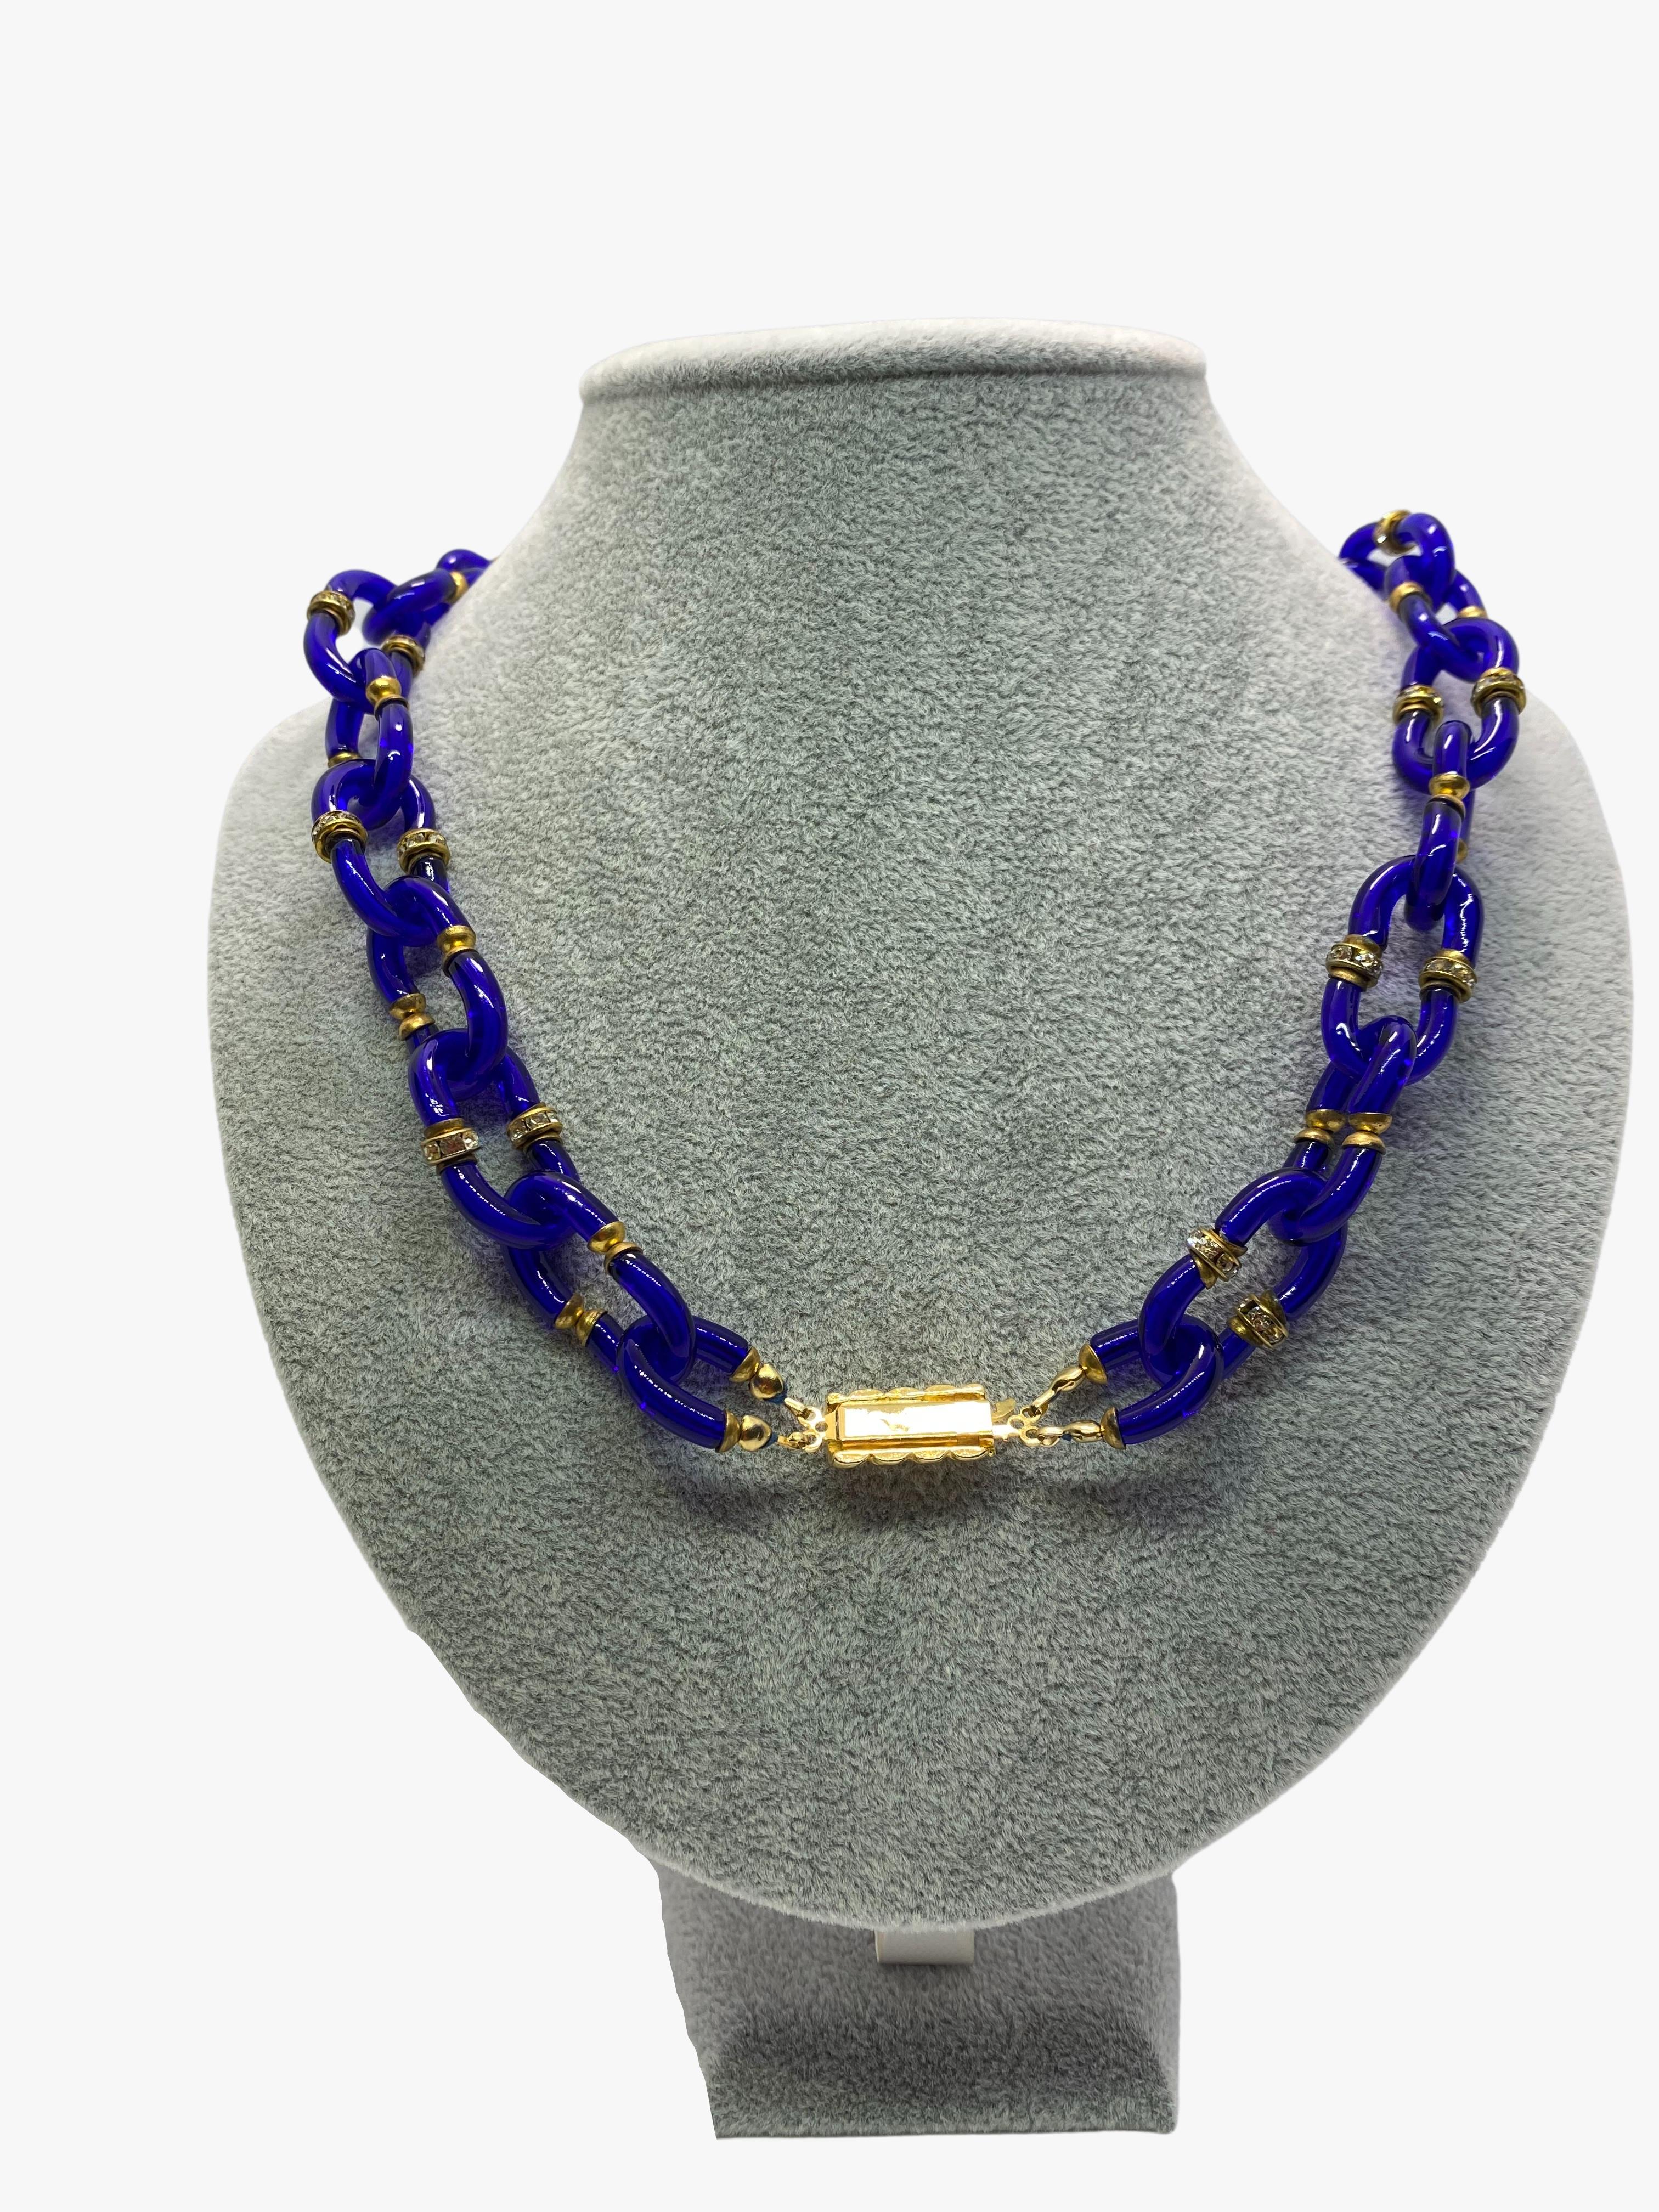 Vintage necklace designed by Archimede Seguso in collaboration with Coco Chanel. The glass “C” shape links create an interlocking Chanel CC logo.

The chain made from Murano glass in dark blue color. Chain links are fastened with brass and randomly